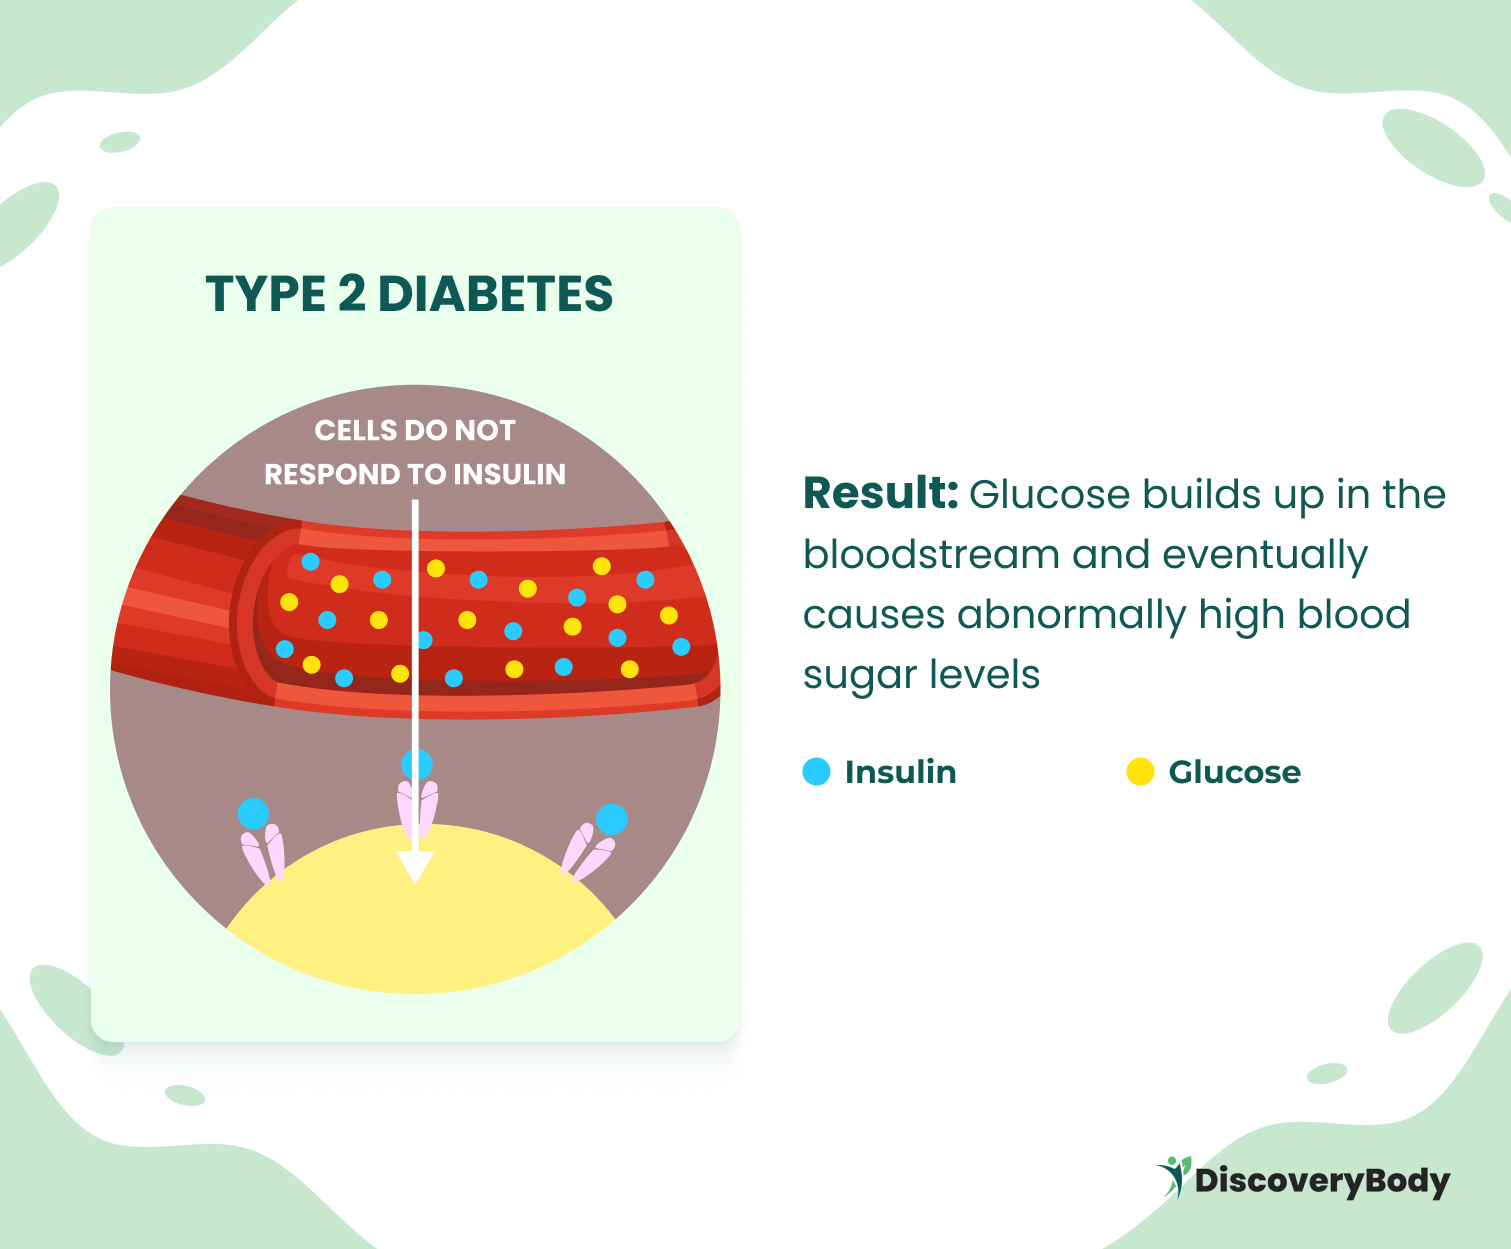 Unlike Type 1 diabetes, which is caused by an autoimmune attack on the pancreas resulting in a lack of insulin production, Type 2 diabetes occurs when the body either doesn't produce enough insulin or is unable to use it effectively